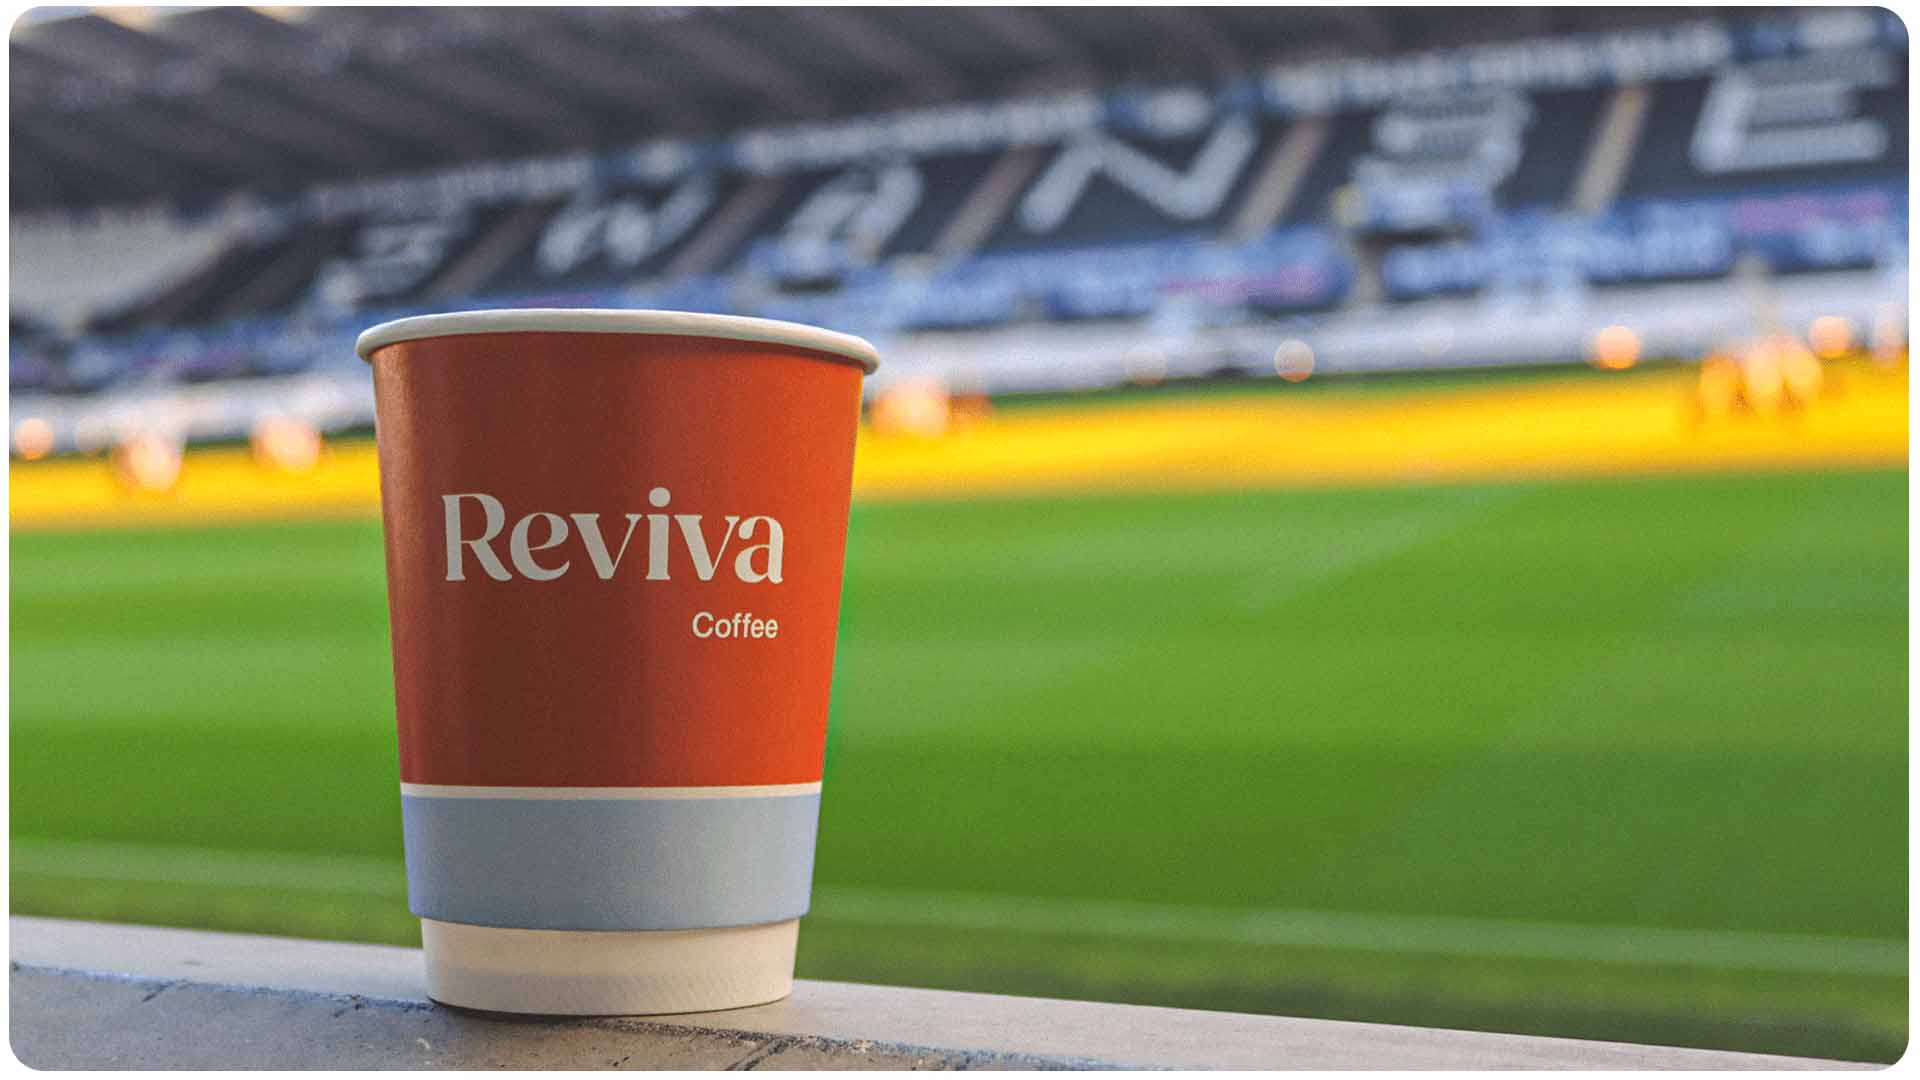 Photograph of a Reviva Coffee